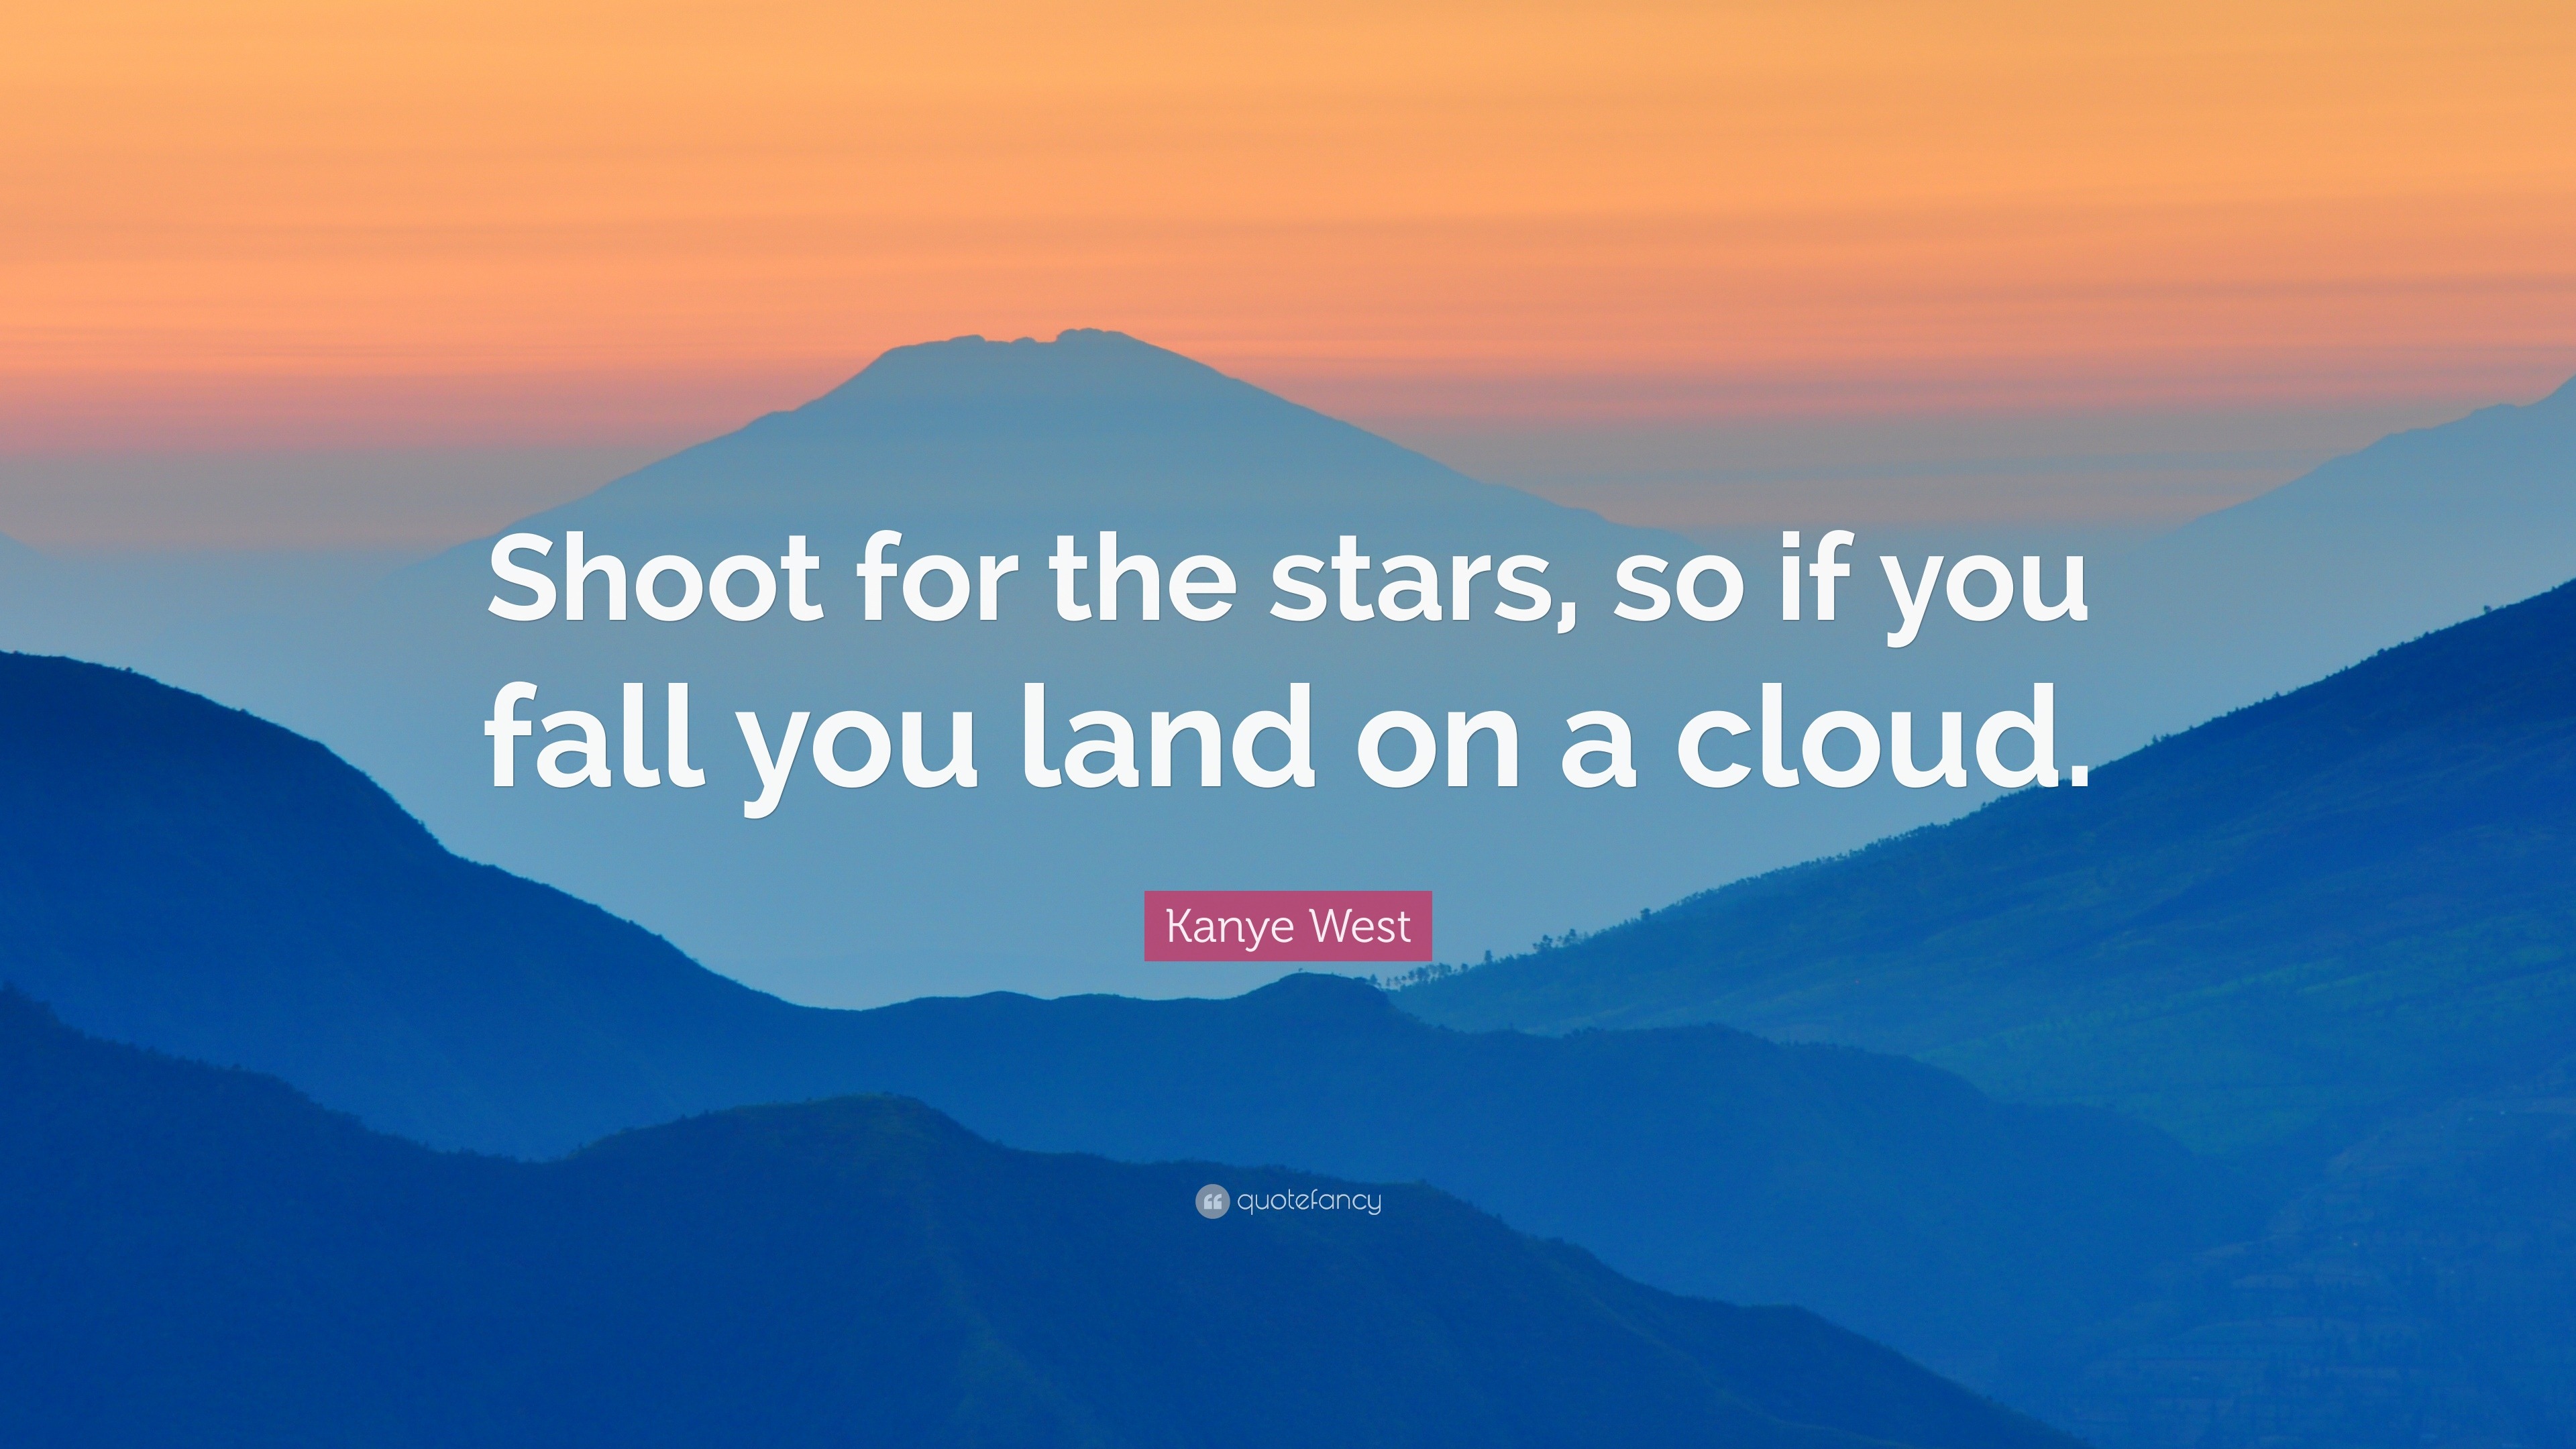 Kanye West Quote “shoot For The Stars So If You Fall You Land On A